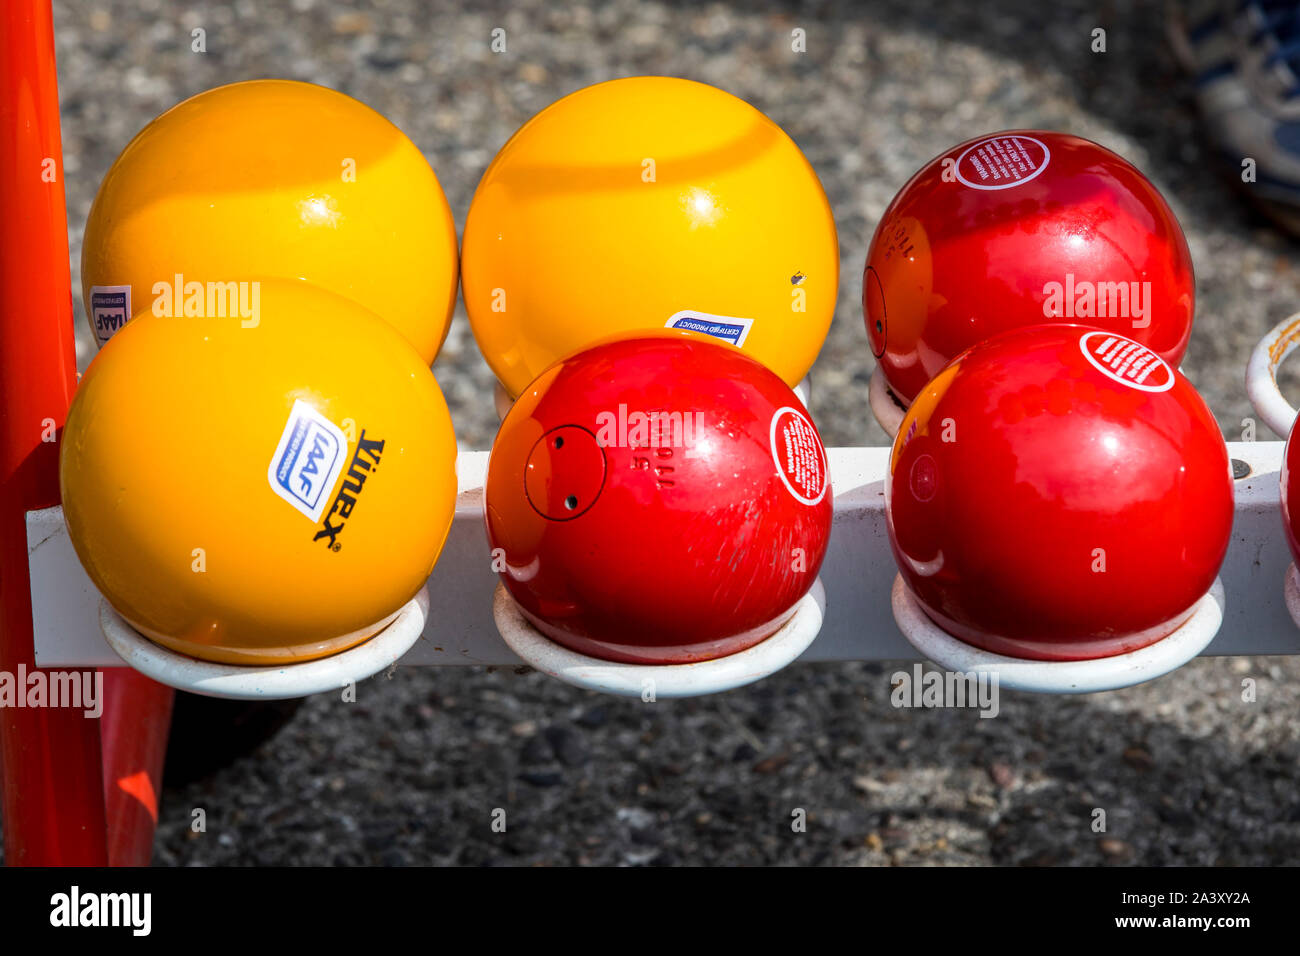 ball shots, metal balls, various weights, sizes, colors, on a sports field, track and field athletics Stock Photo